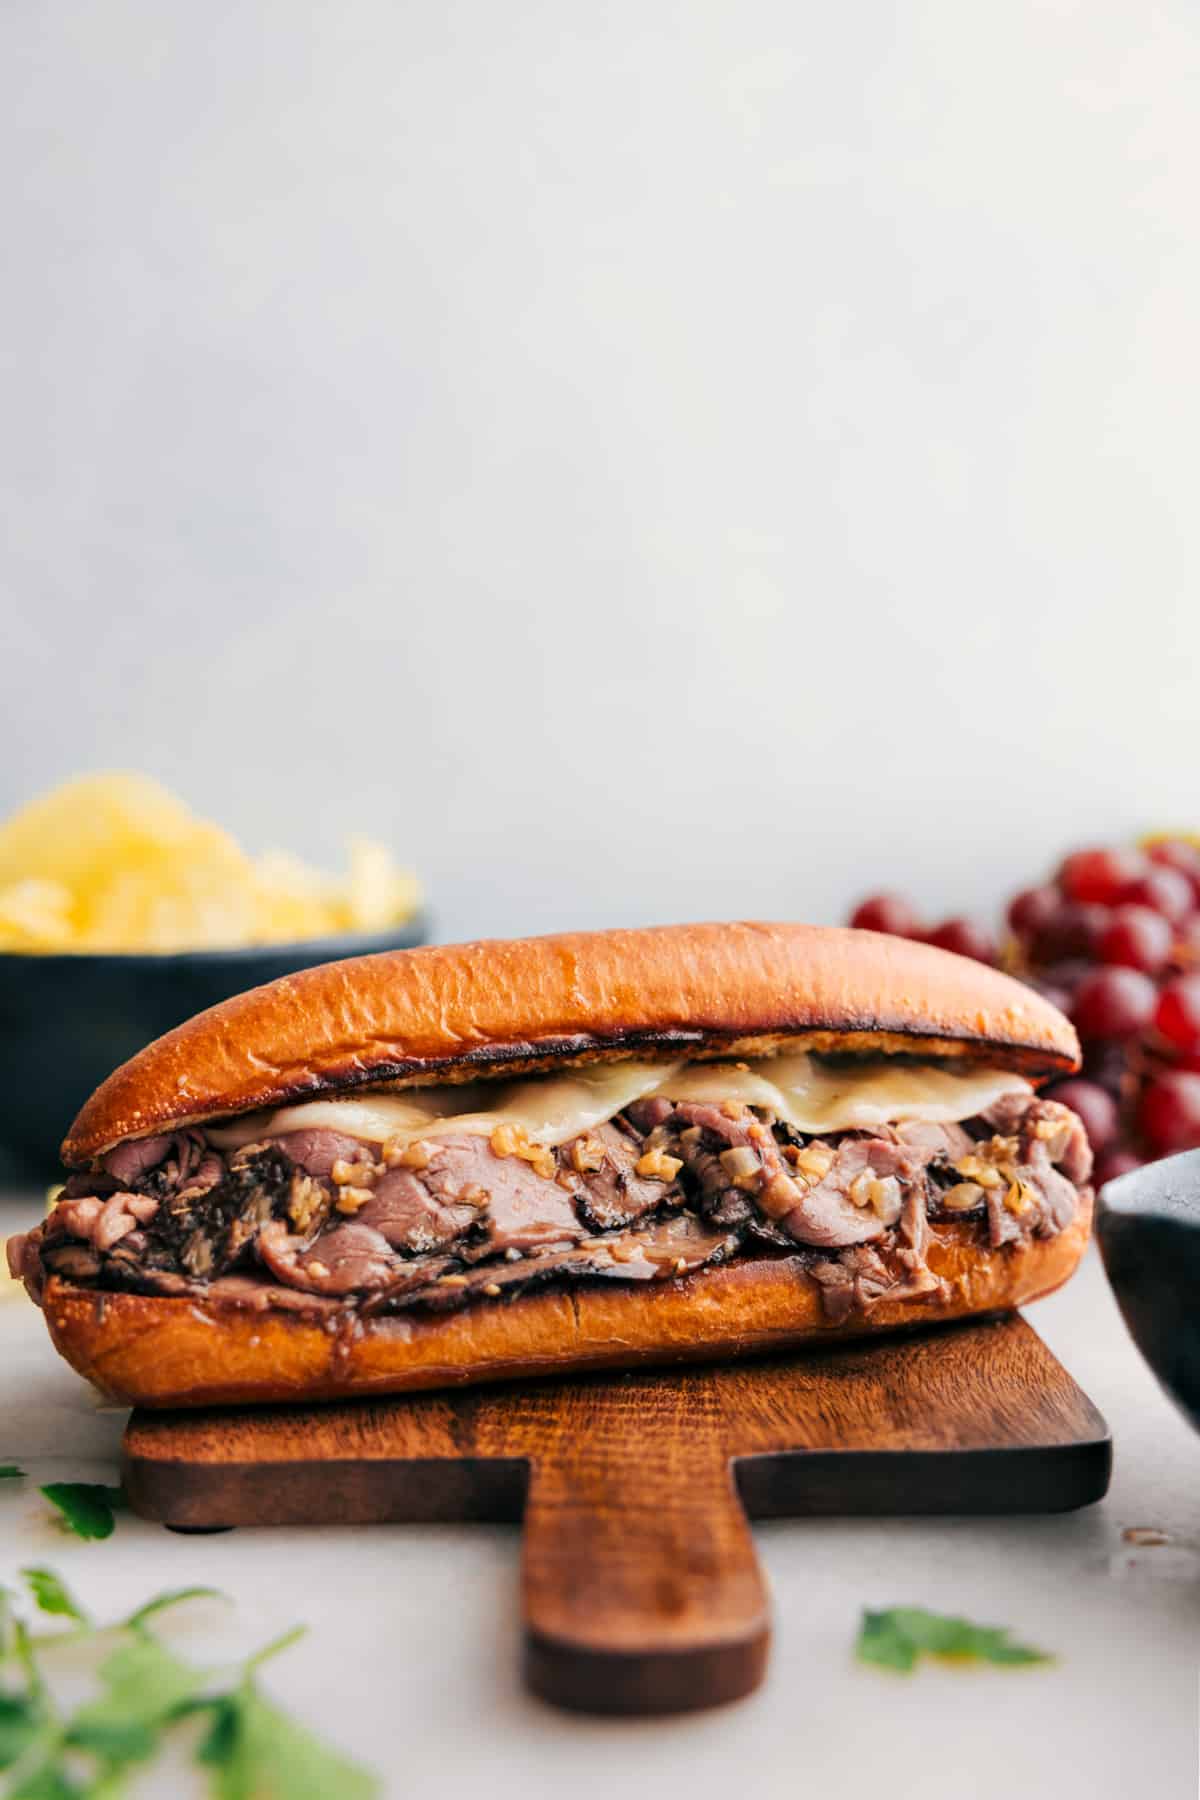 Easy and melty French Dip Sandwiches ready to be enjoyed.